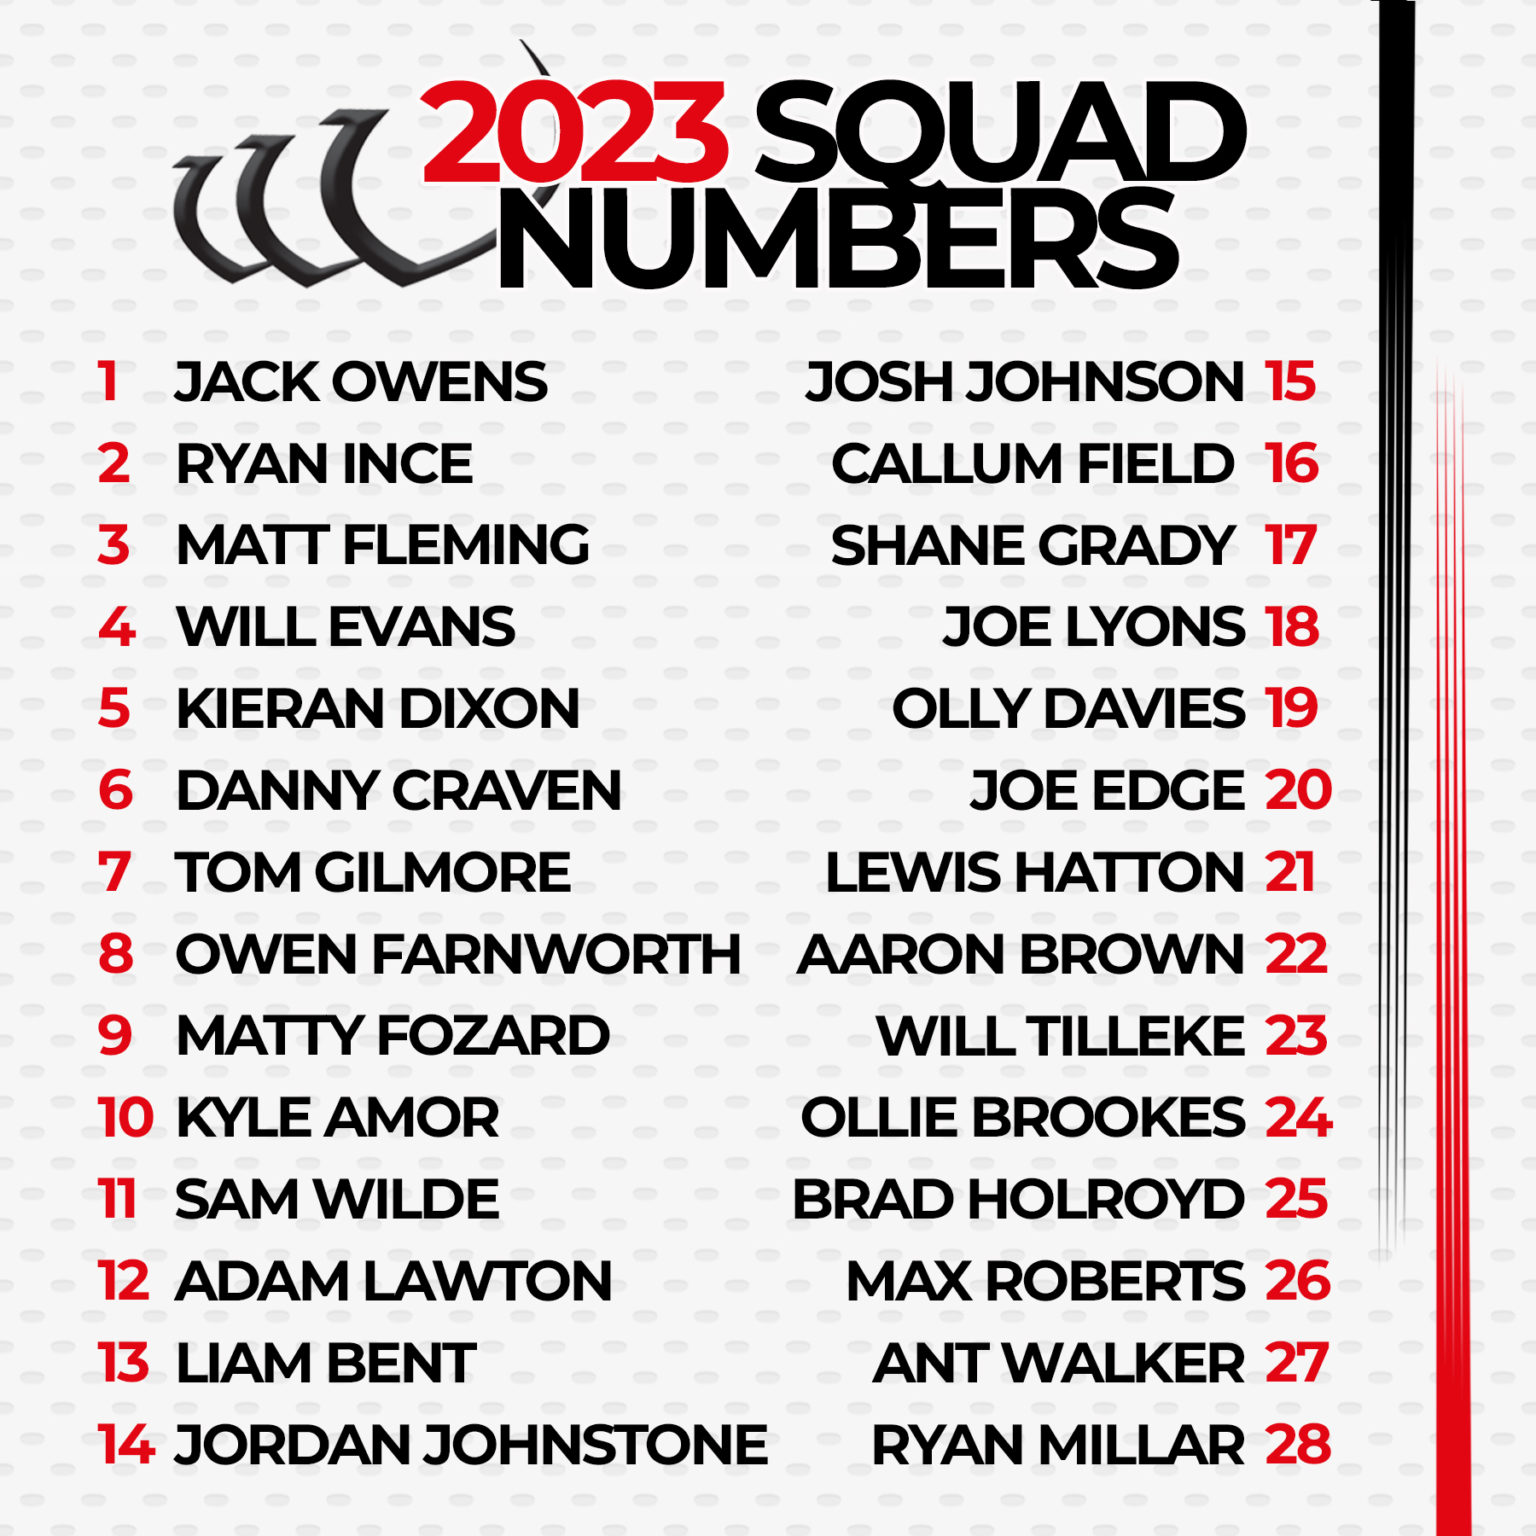 Vikings announce 2023 squad numbers Widnes Vikings